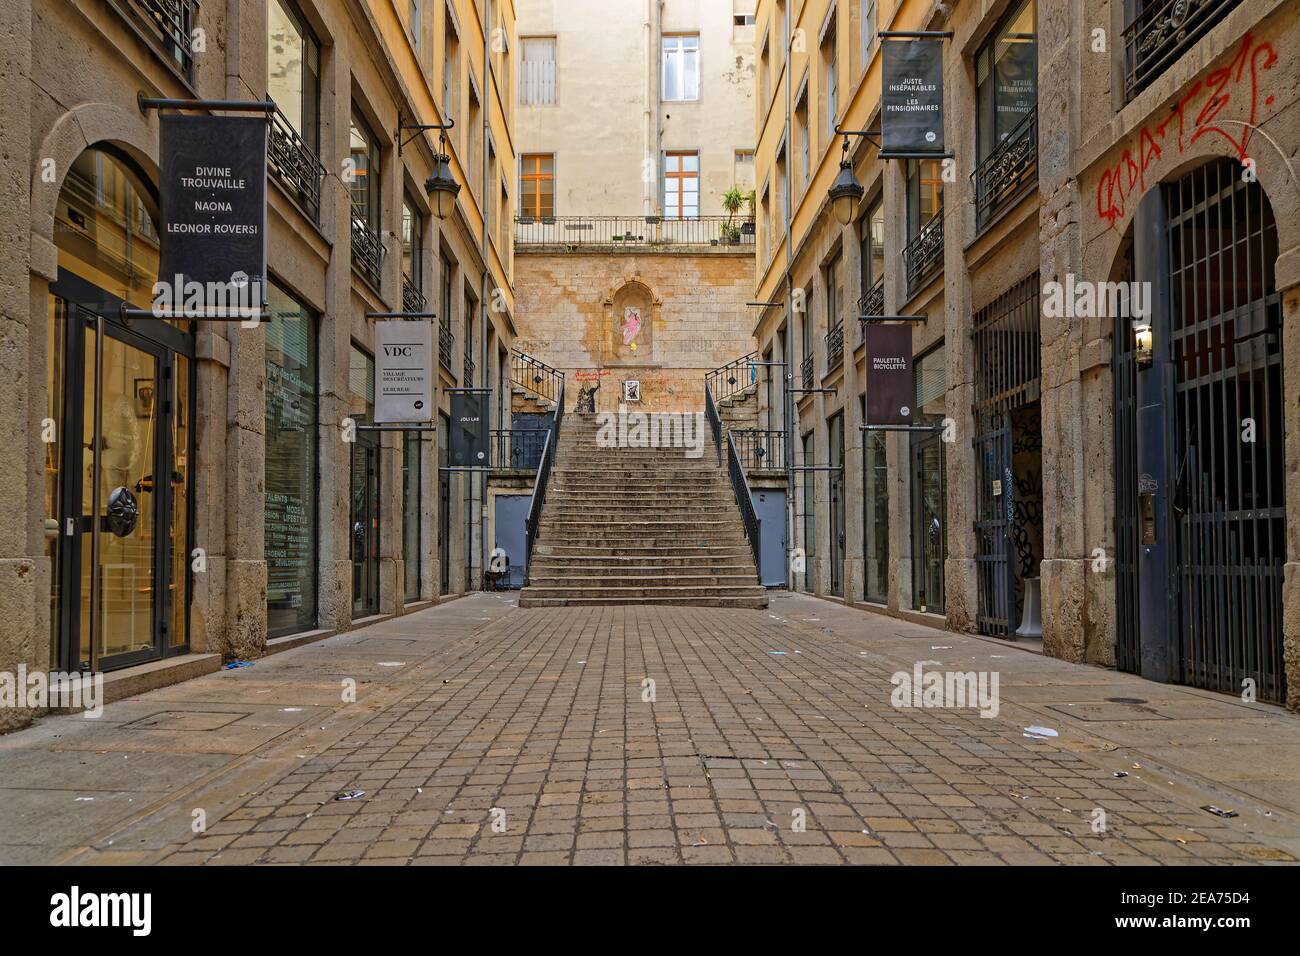 LYON, FRANCE, February 6, 2021 : The Passage Thiaffait is an urban area, and a famous traboule, located on the slopes of La Croix-Rousse. All its work Stock Photo